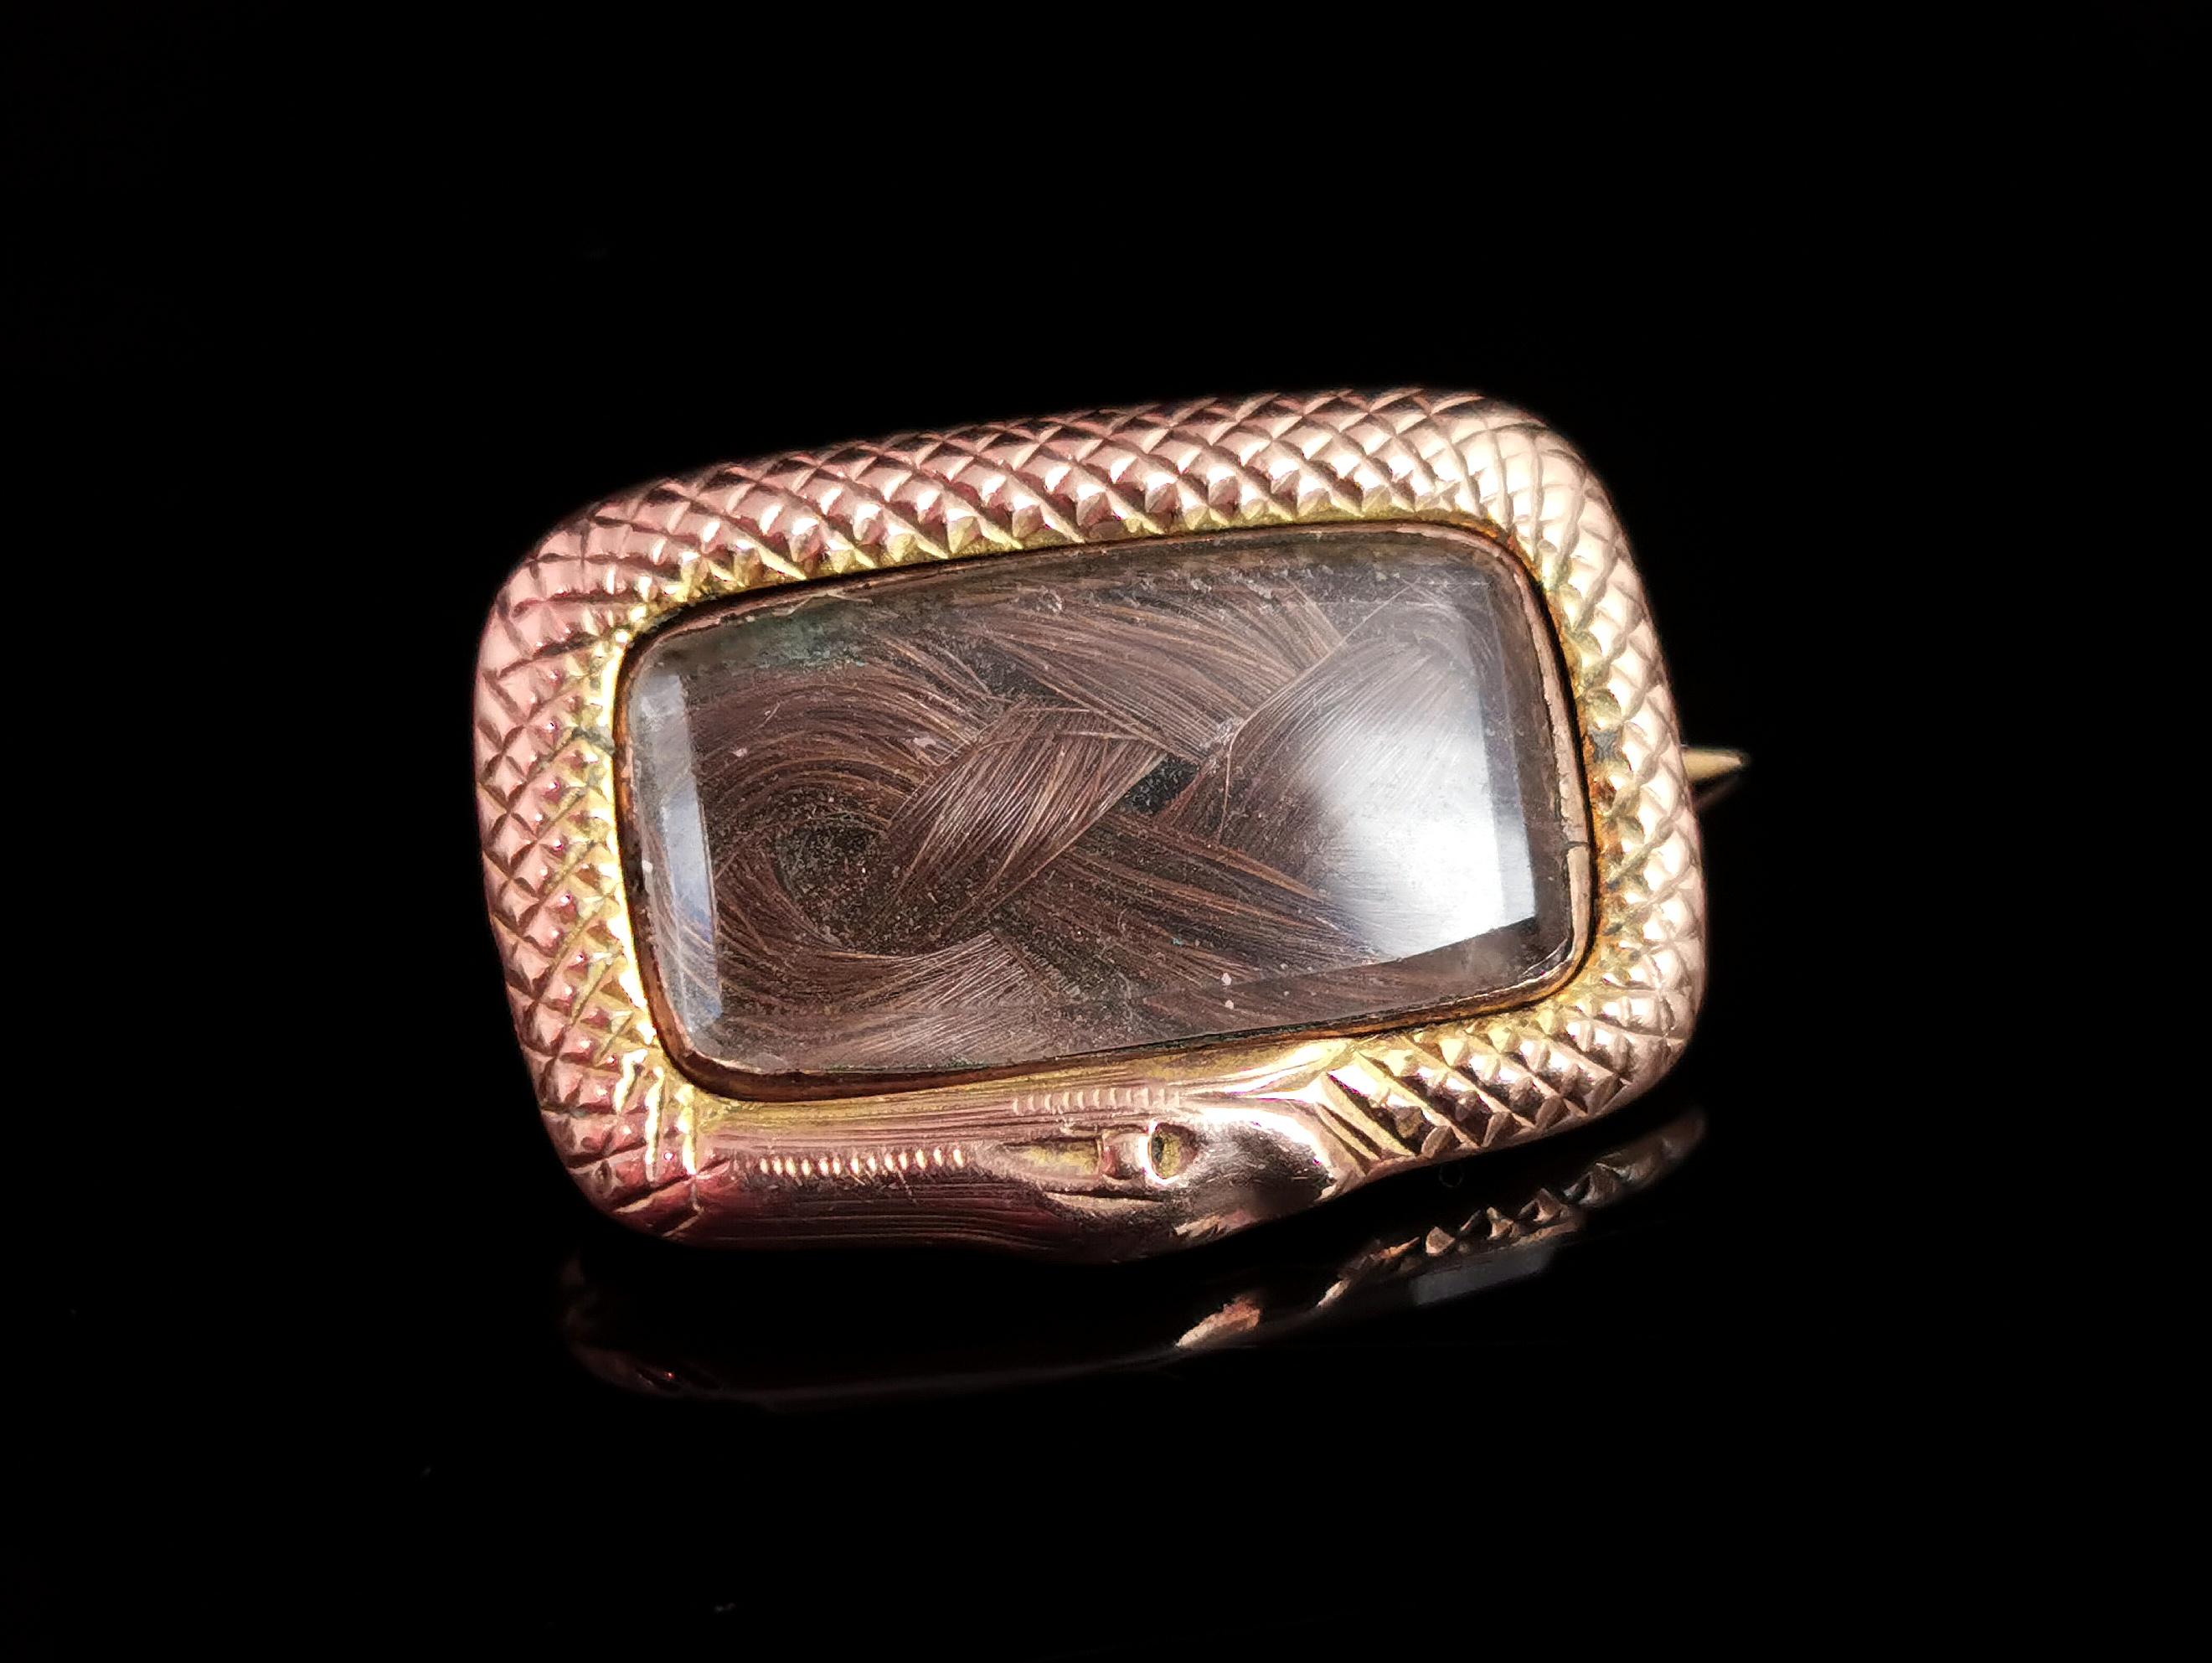 A sweet little antique Georgian era ouroboros mourning brooch or pin.

The Ouroboros is a depiction of a snake or serpent eating its own tail, creating a never ending cycle, the symbol of eternity.

They embody the sentiment of eternal love,